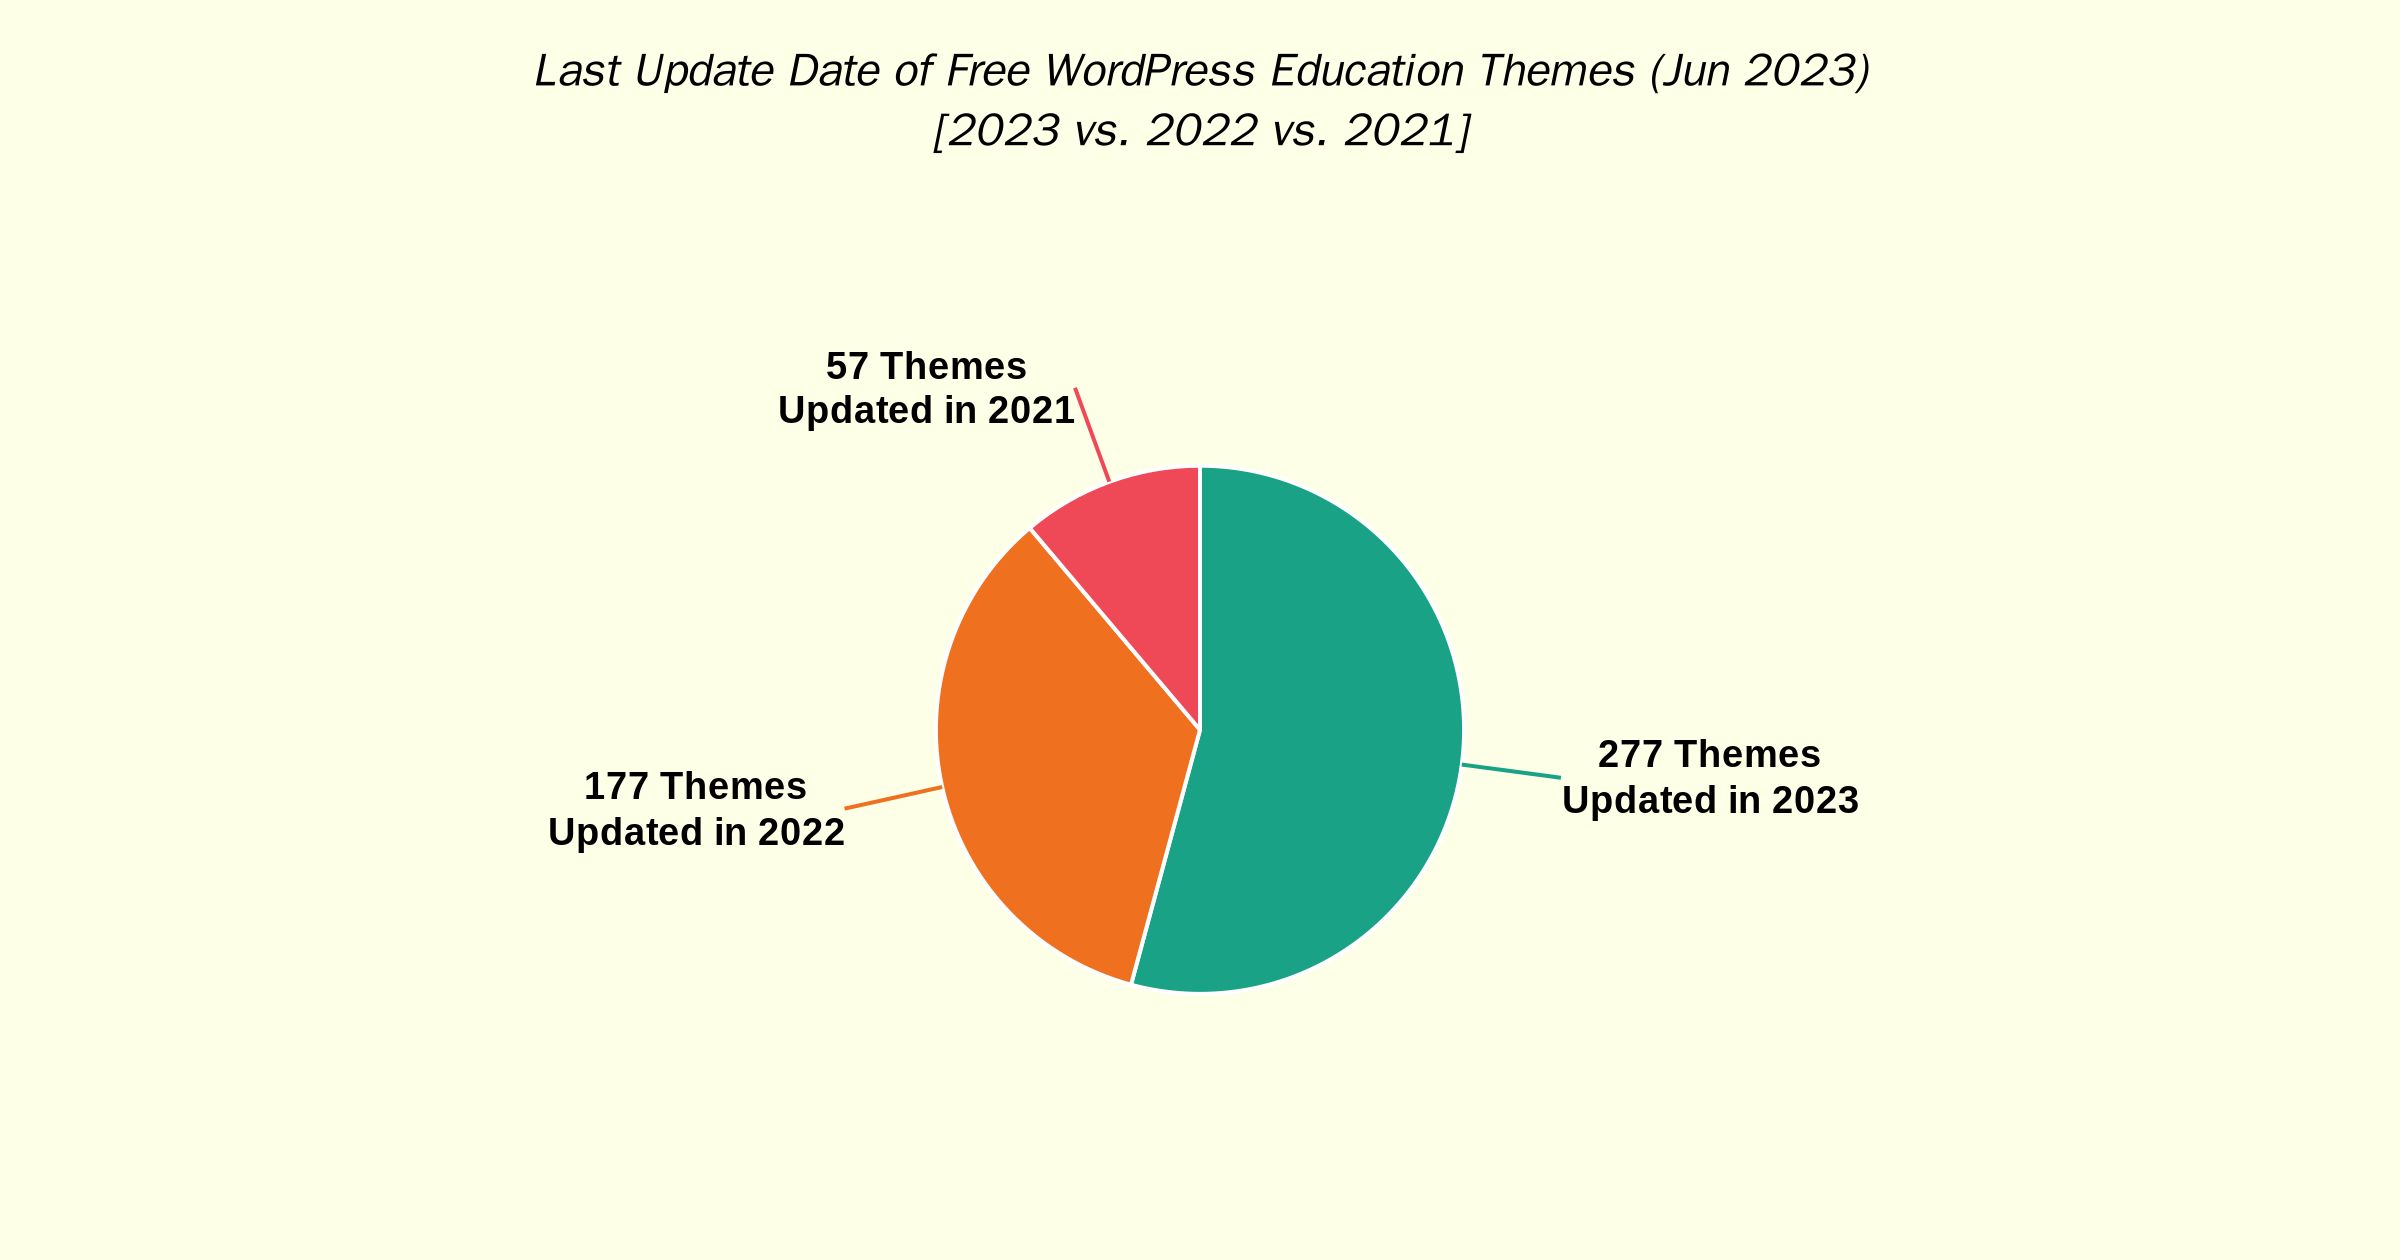 Chart of last update date for free WordPress education themes